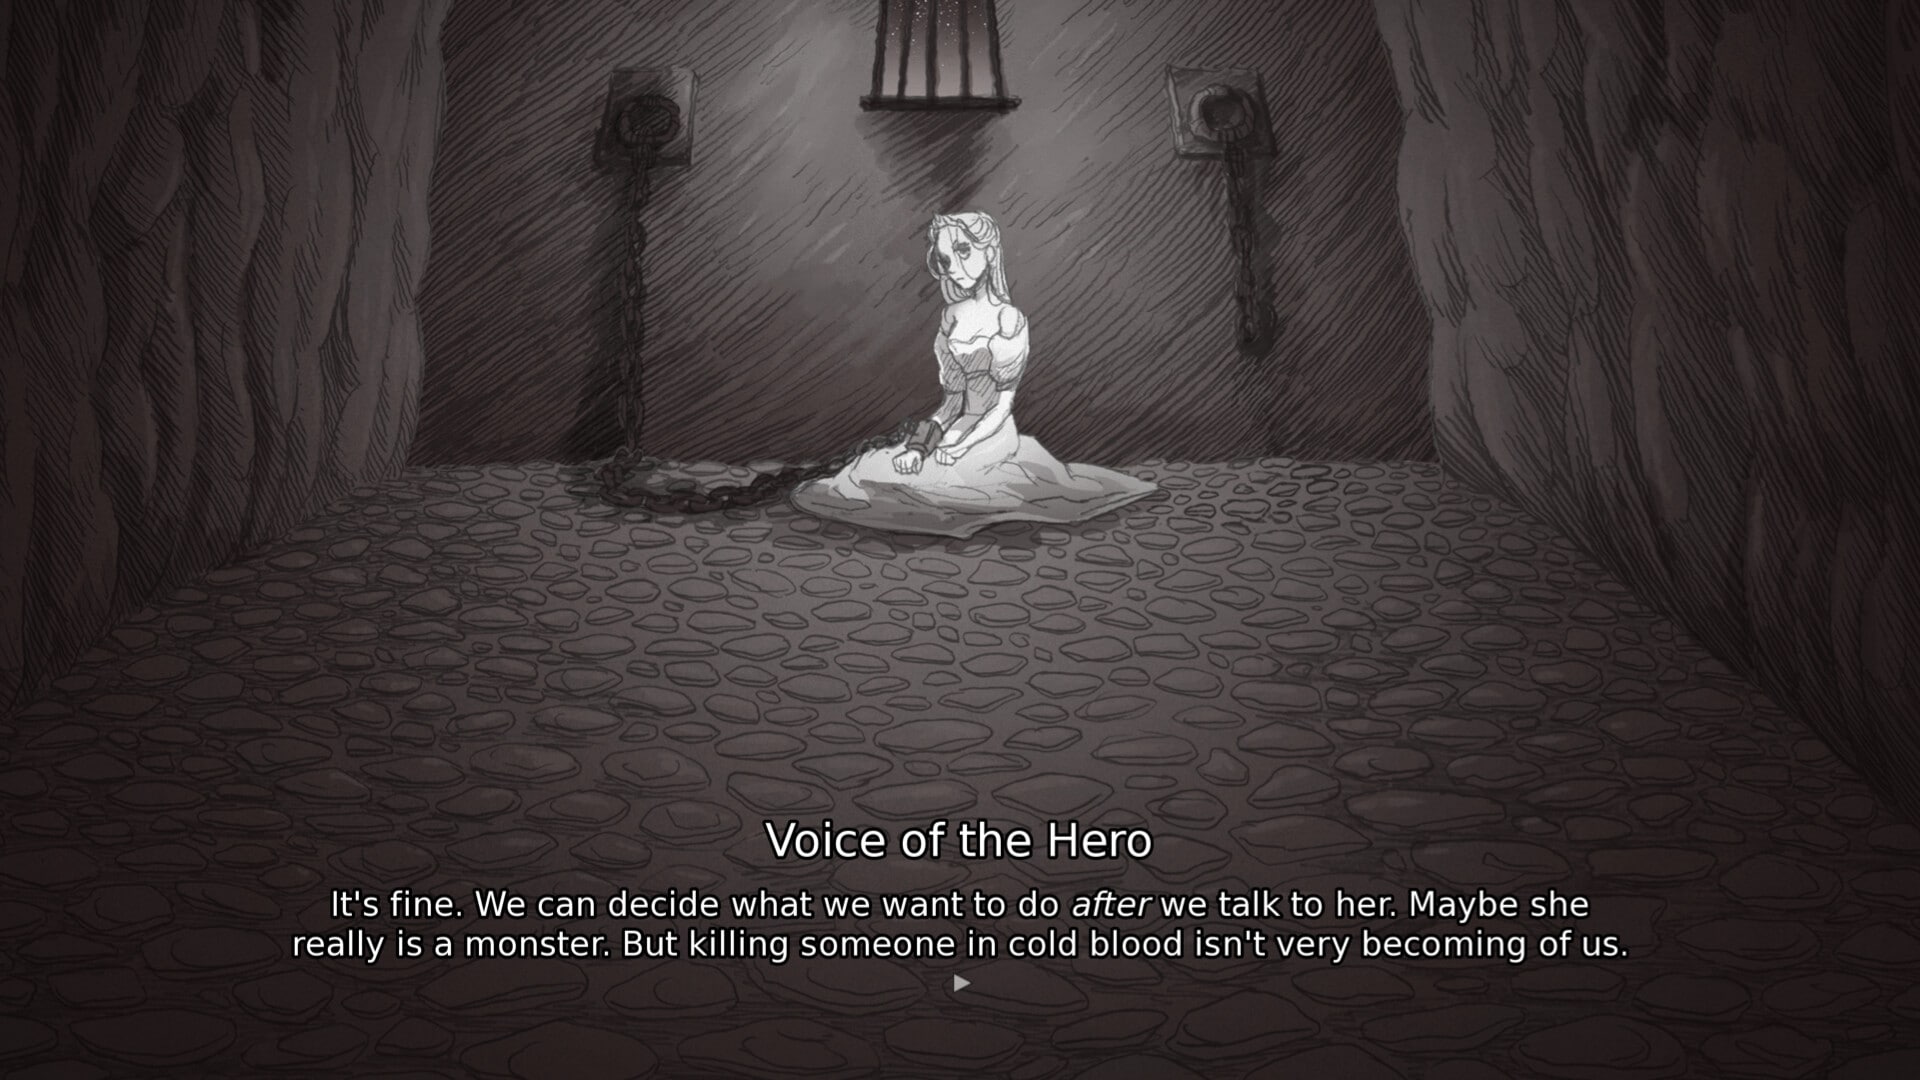 Screenshot of the princess chained to a wall while the Hero says "It's fine. We can decide what we want to do after we talk to her. Maybe she really is a monster. But killing someone in cold blood isn't very becoming of us."